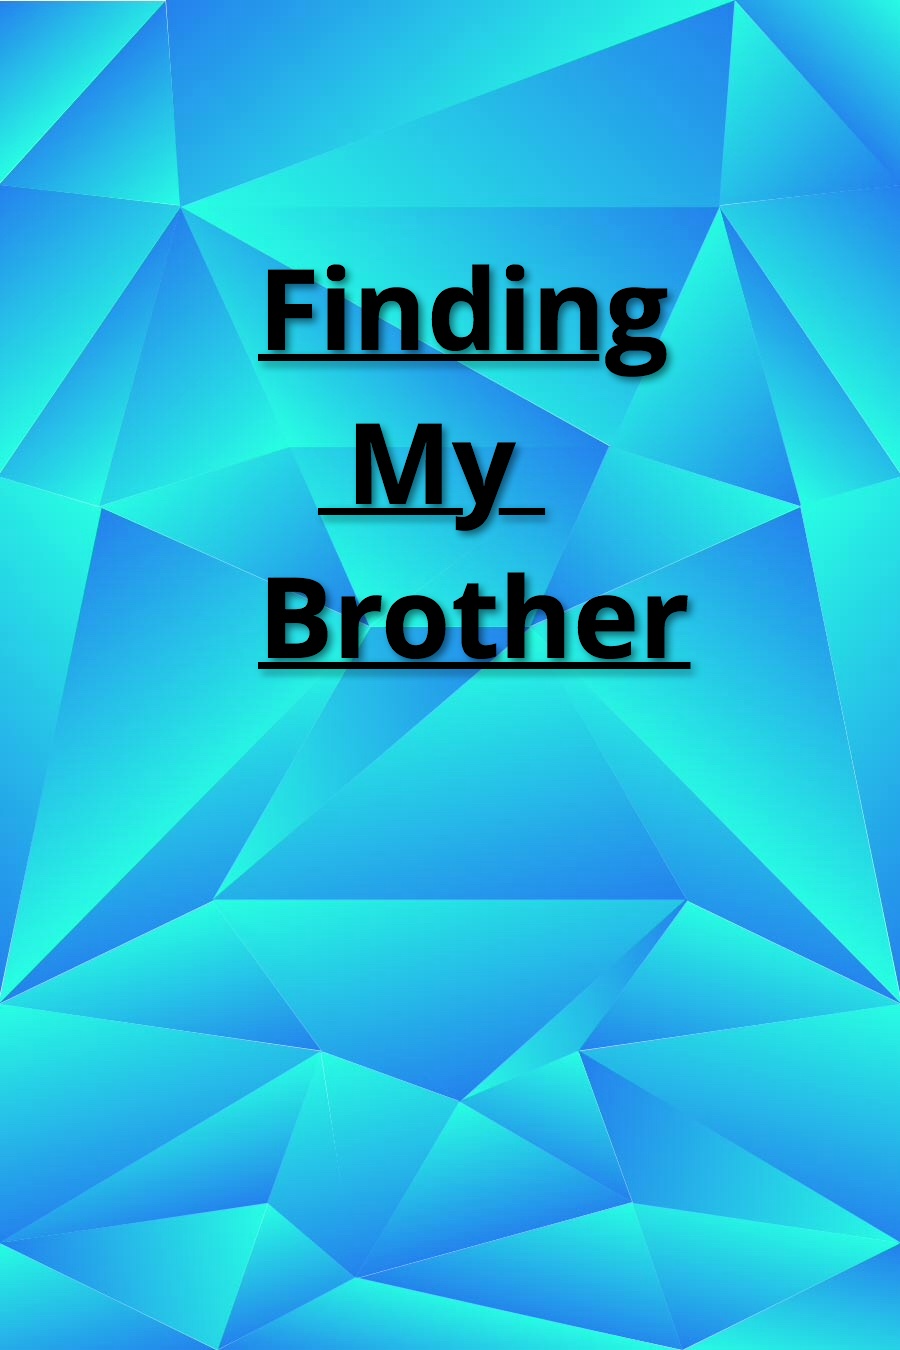 Finding My Brother by Jon S